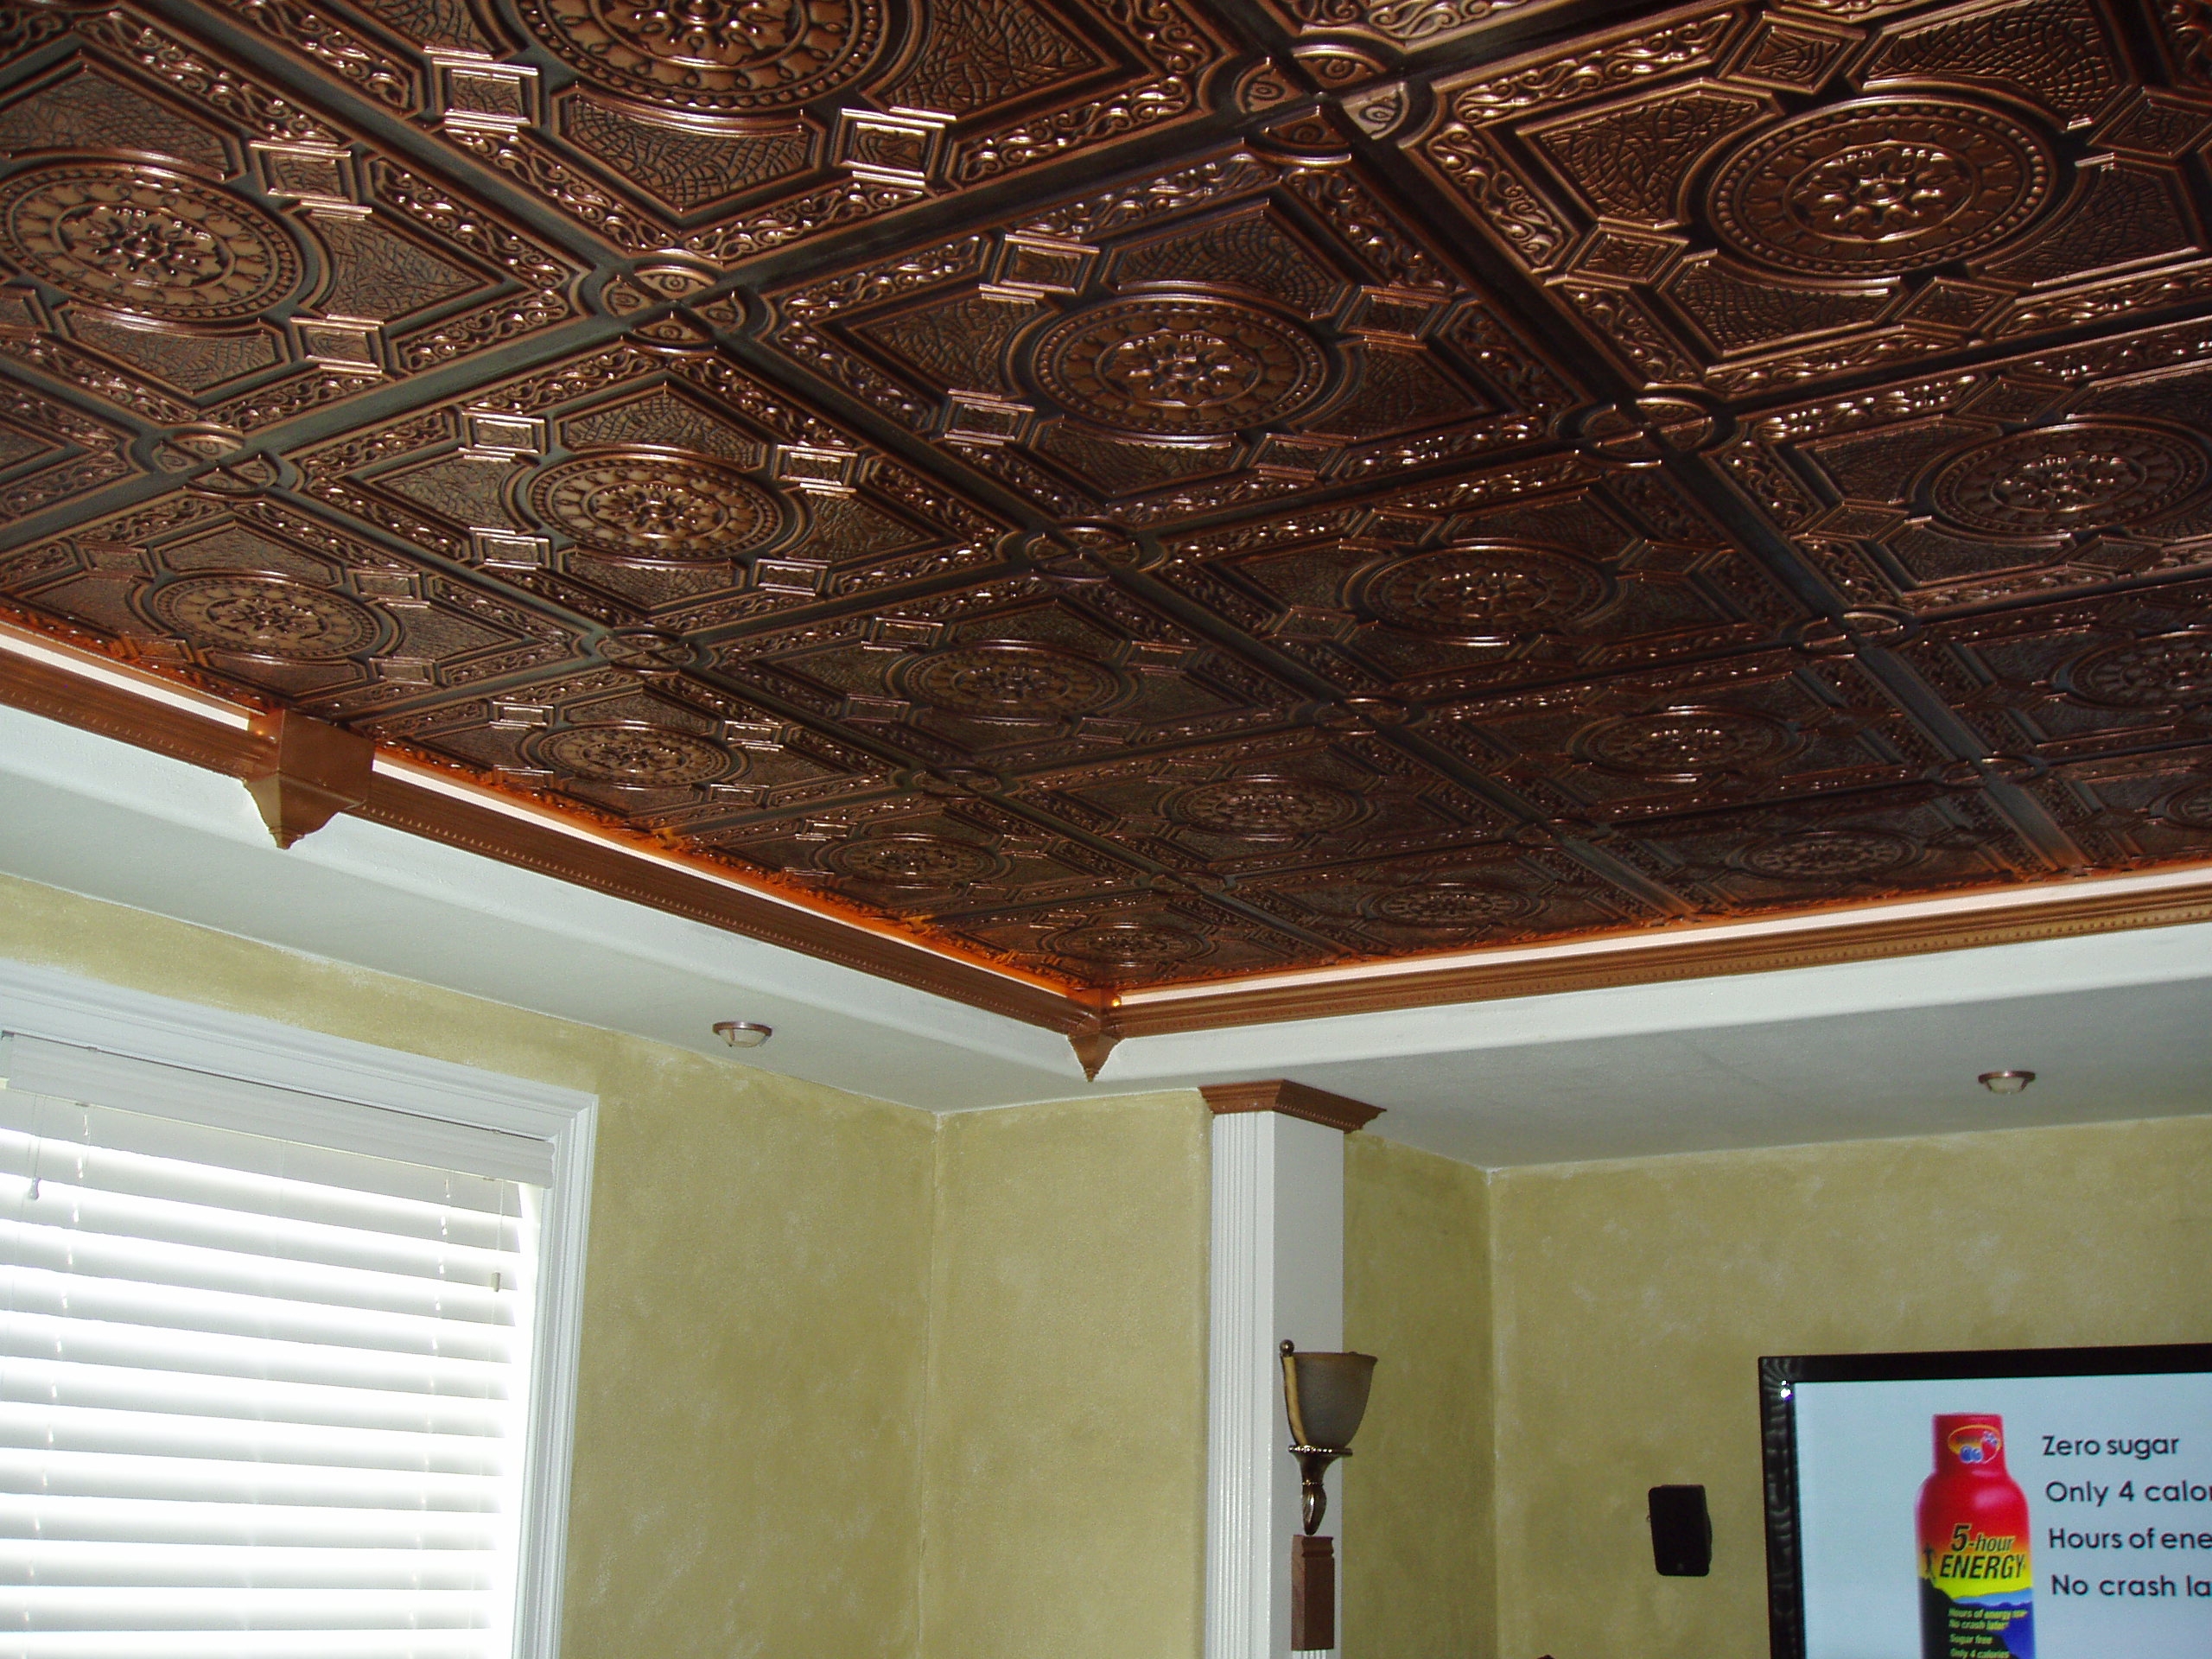 Permalink to Copper Tile Ceiling Images